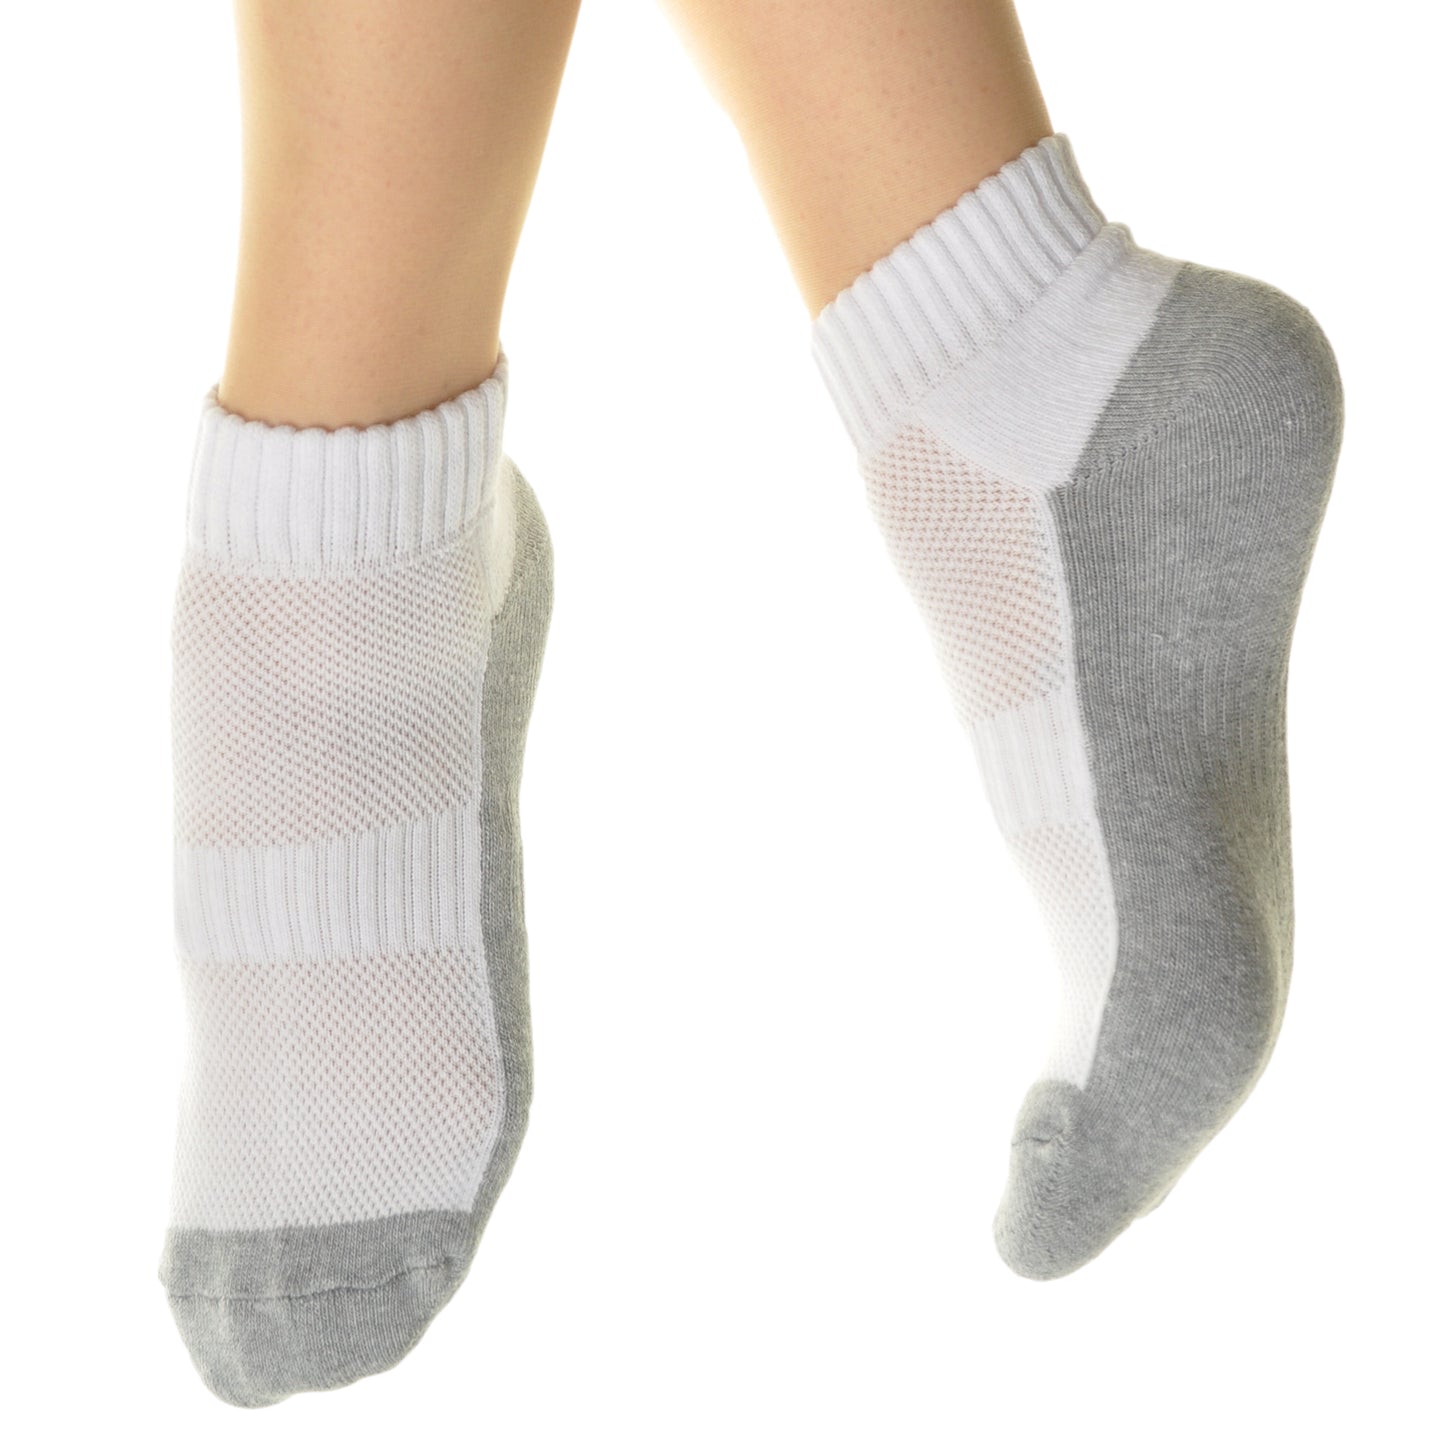 Unisex Ankle Socks with Arch Support and Cushioned Soles (12-Pairs)